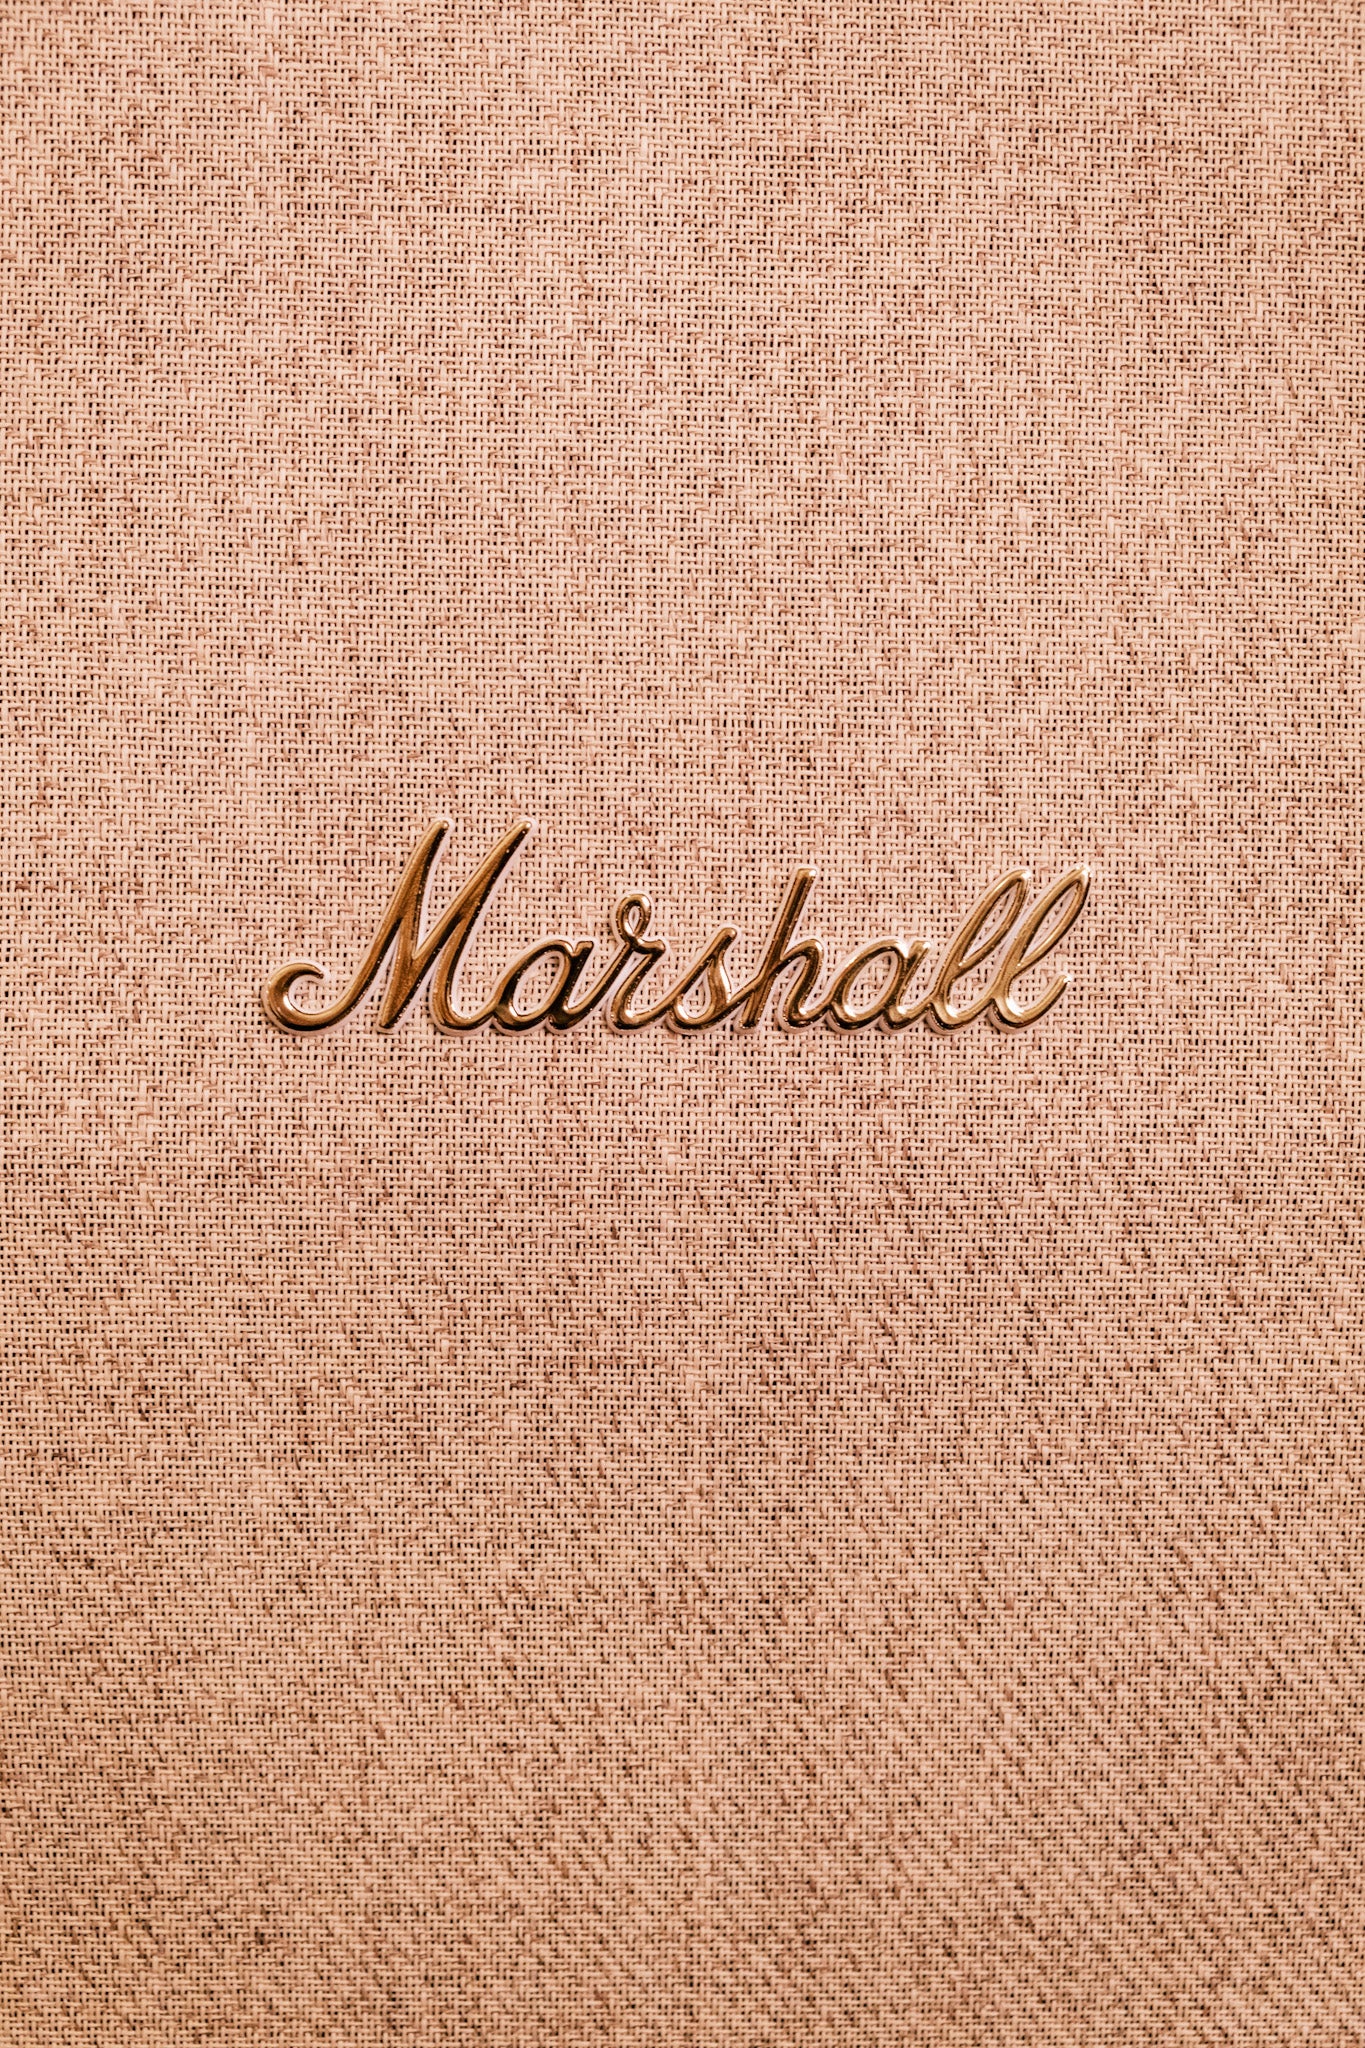 Marshall Design Store JCM 800 Lead Series Studio with Lead 2x12 SC212 Cabinet